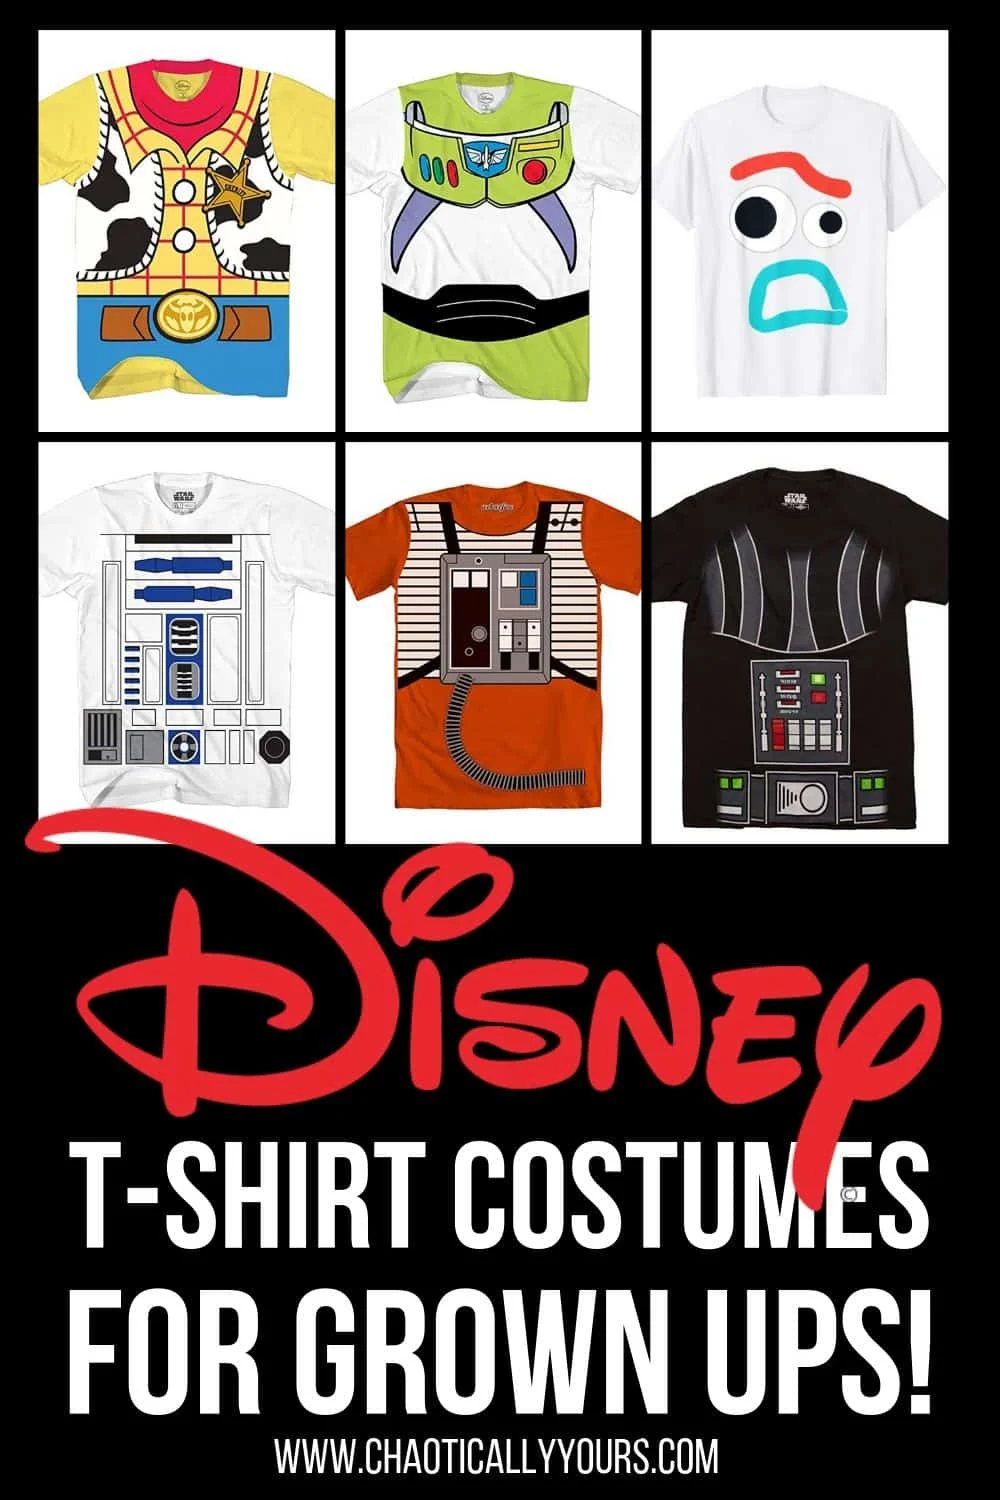 Disney T-shirt costumes for adults!